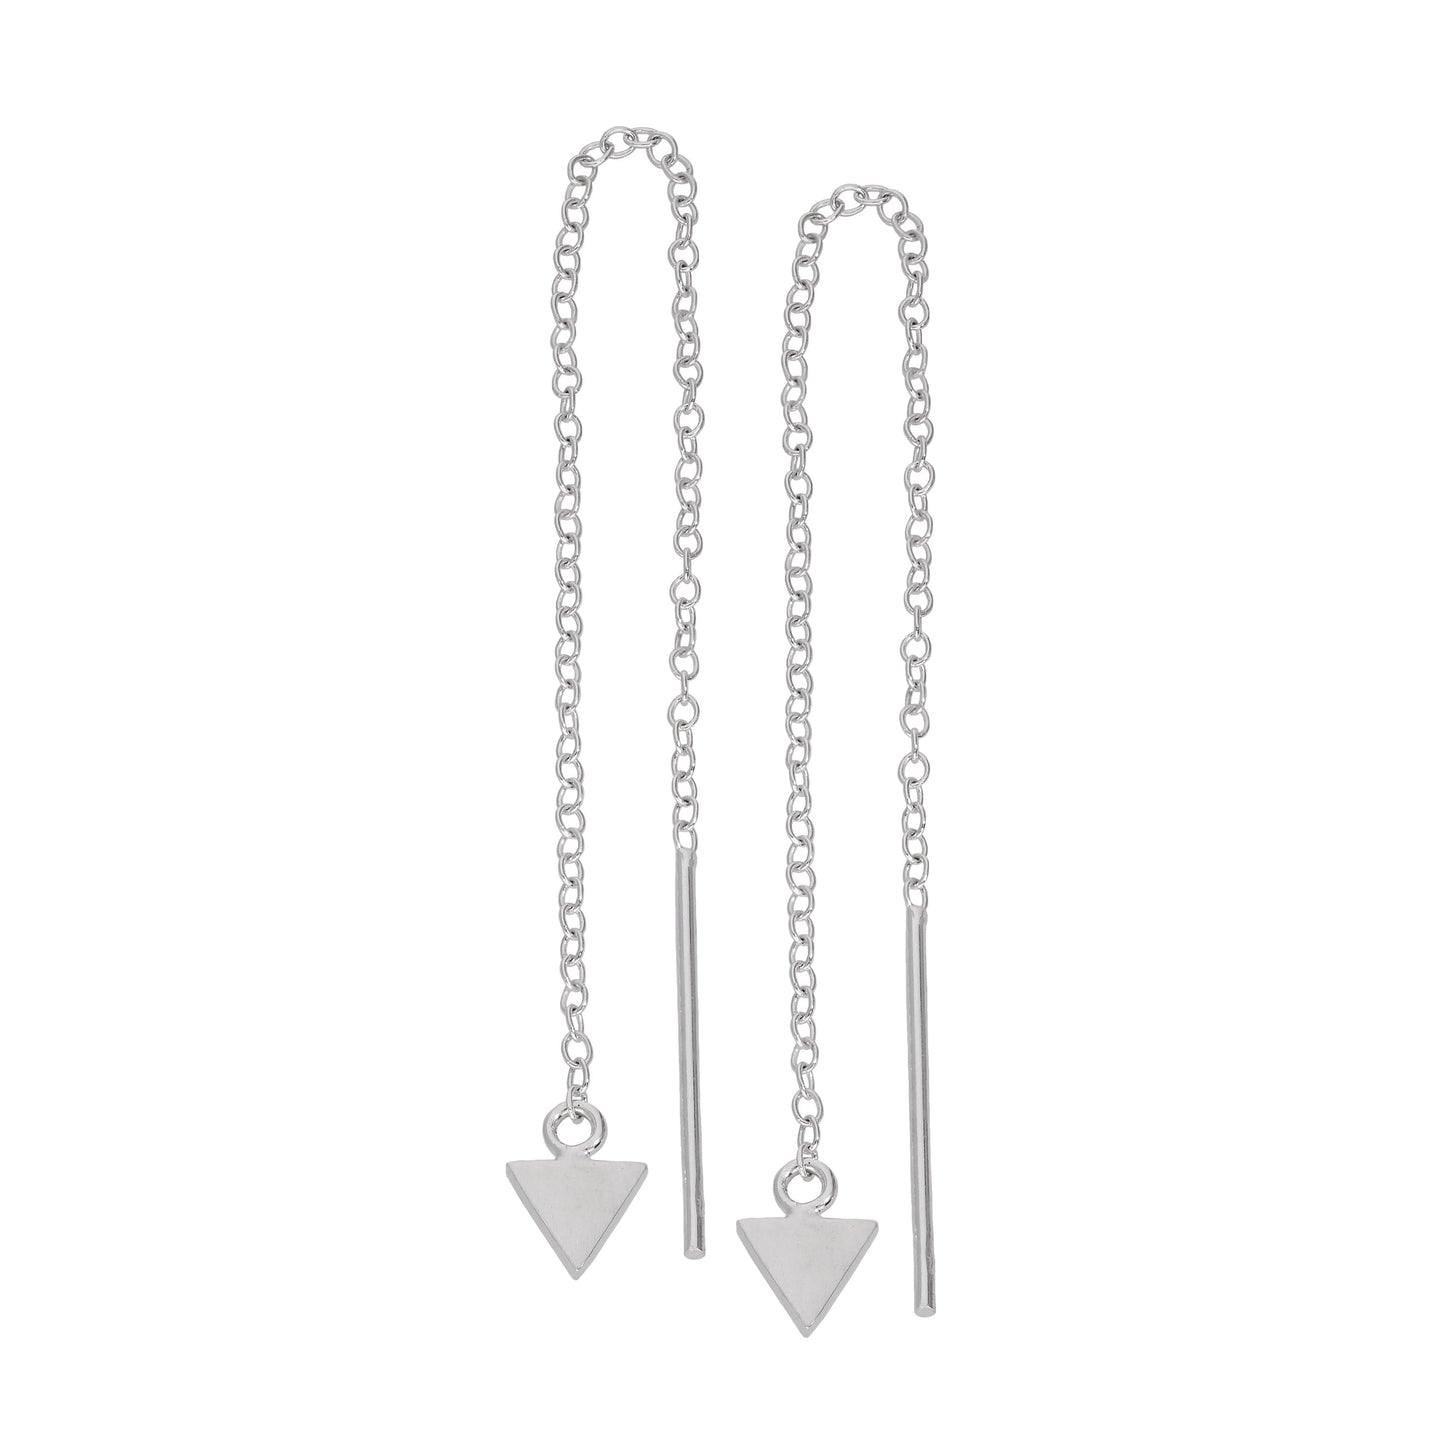 Small Sterling Silver Flat Triangle Pull Through Earrings